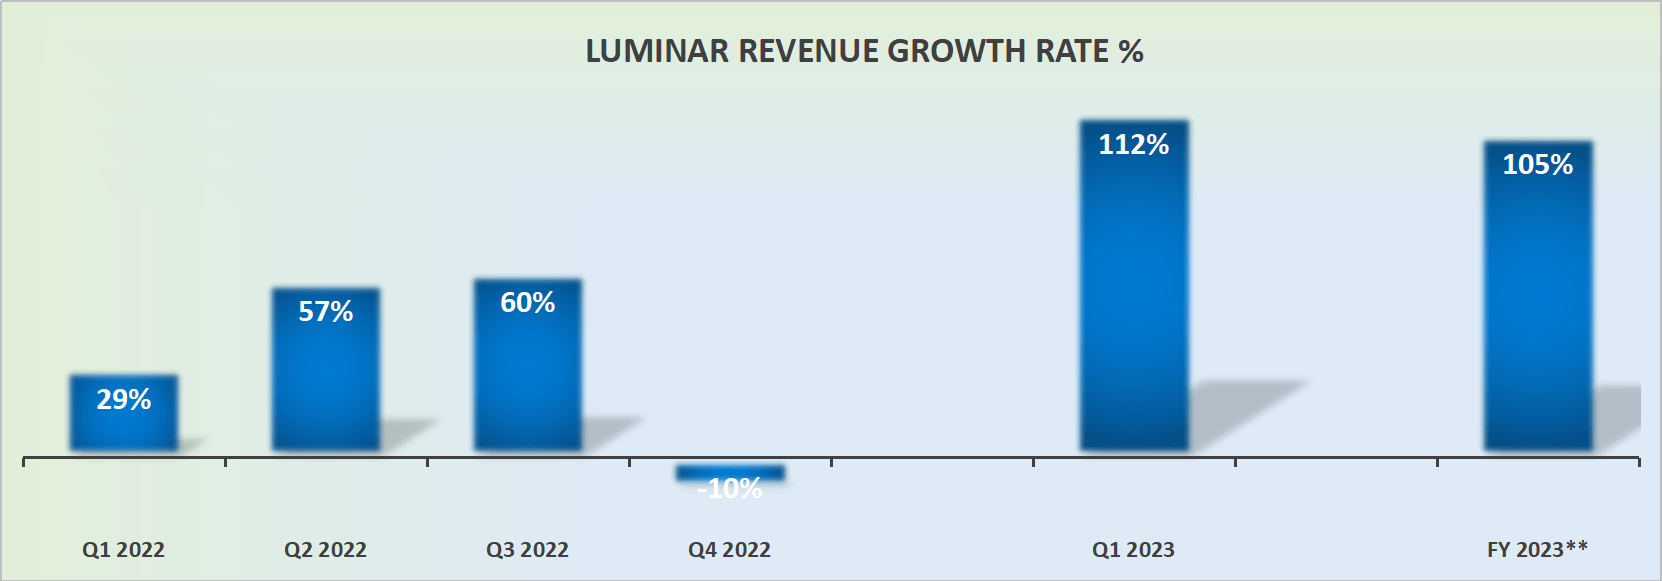 Luminar Technologies, Inc. (NASDAQ:LAZR) Just Released Its First-Quarter  Results And Analysts Are Updating Their Estimates